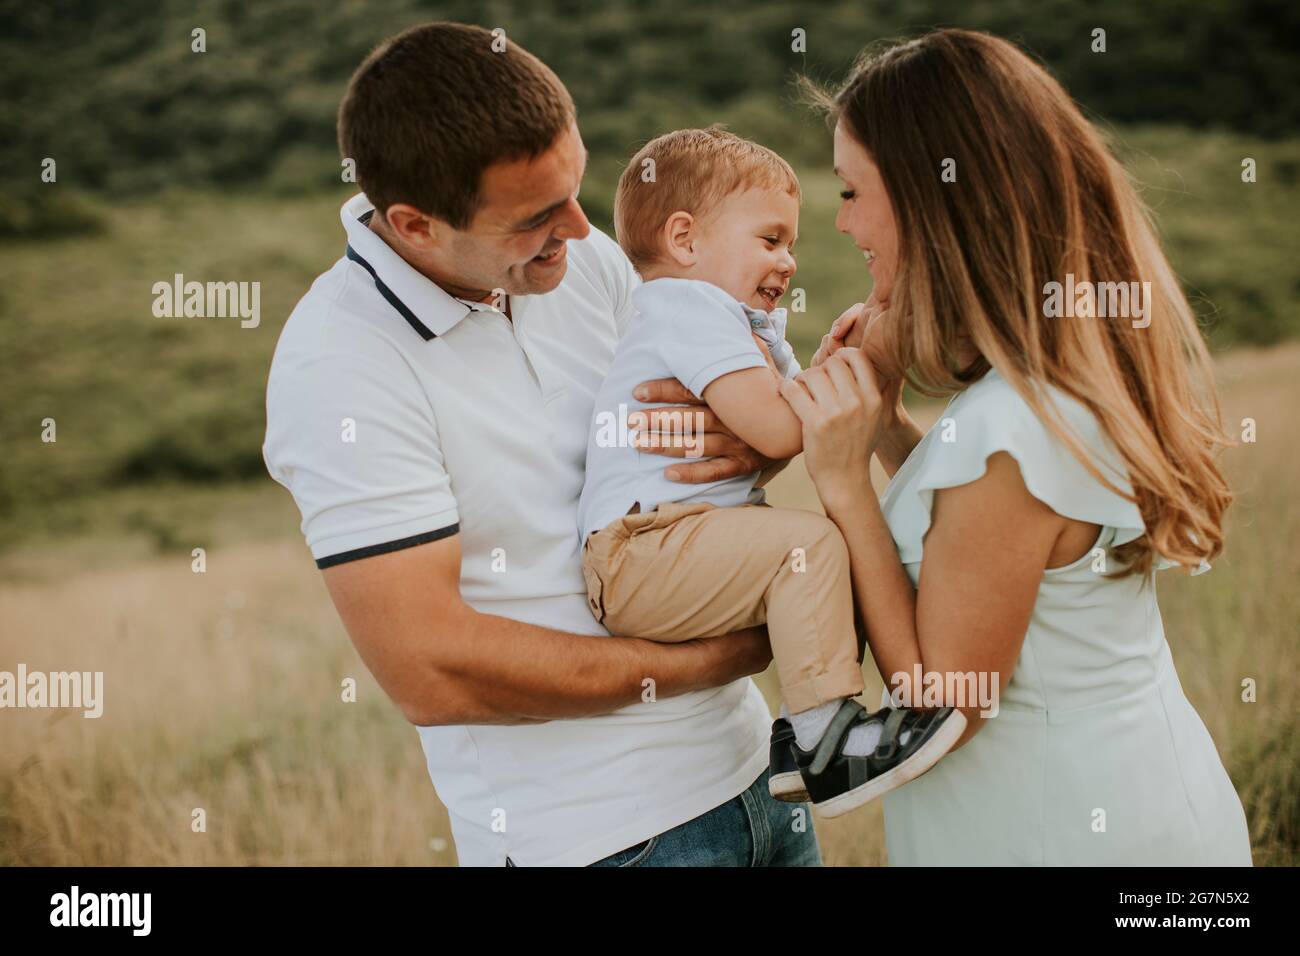 Young family with cute little boy having fun outdoors in the summer field Stock Photo